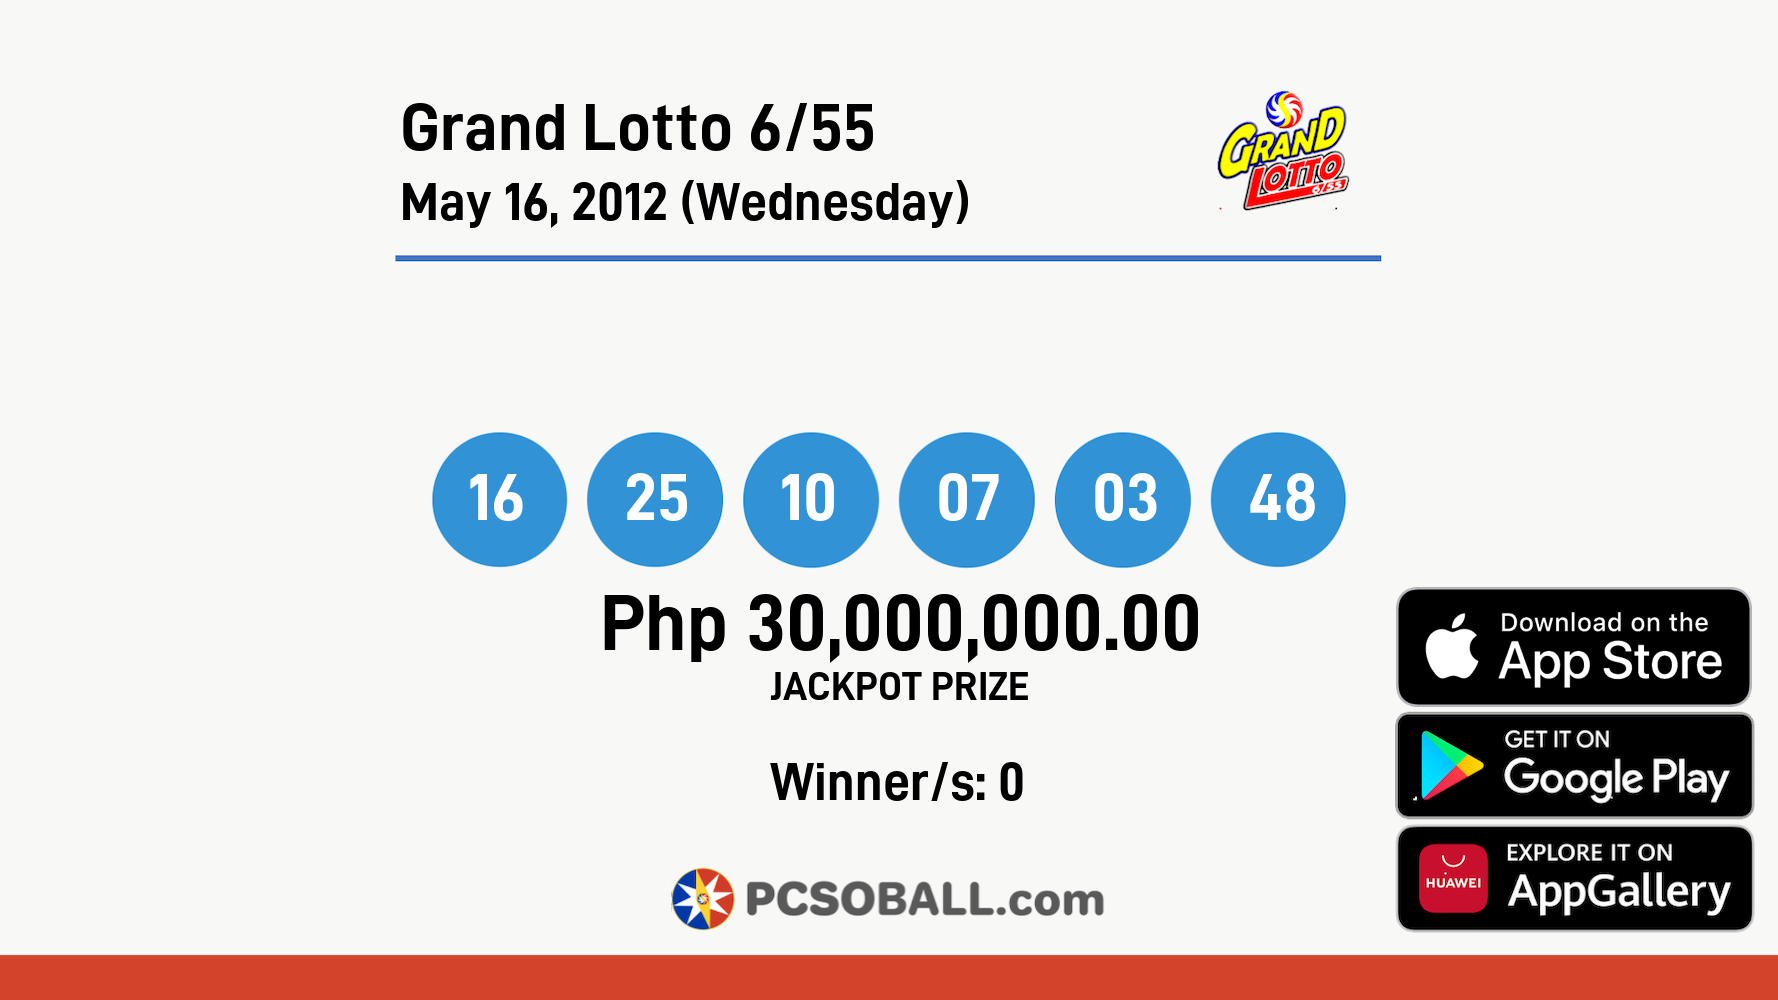 Grand Lotto 6/55 May 16, 2012 (Wednesday) Result